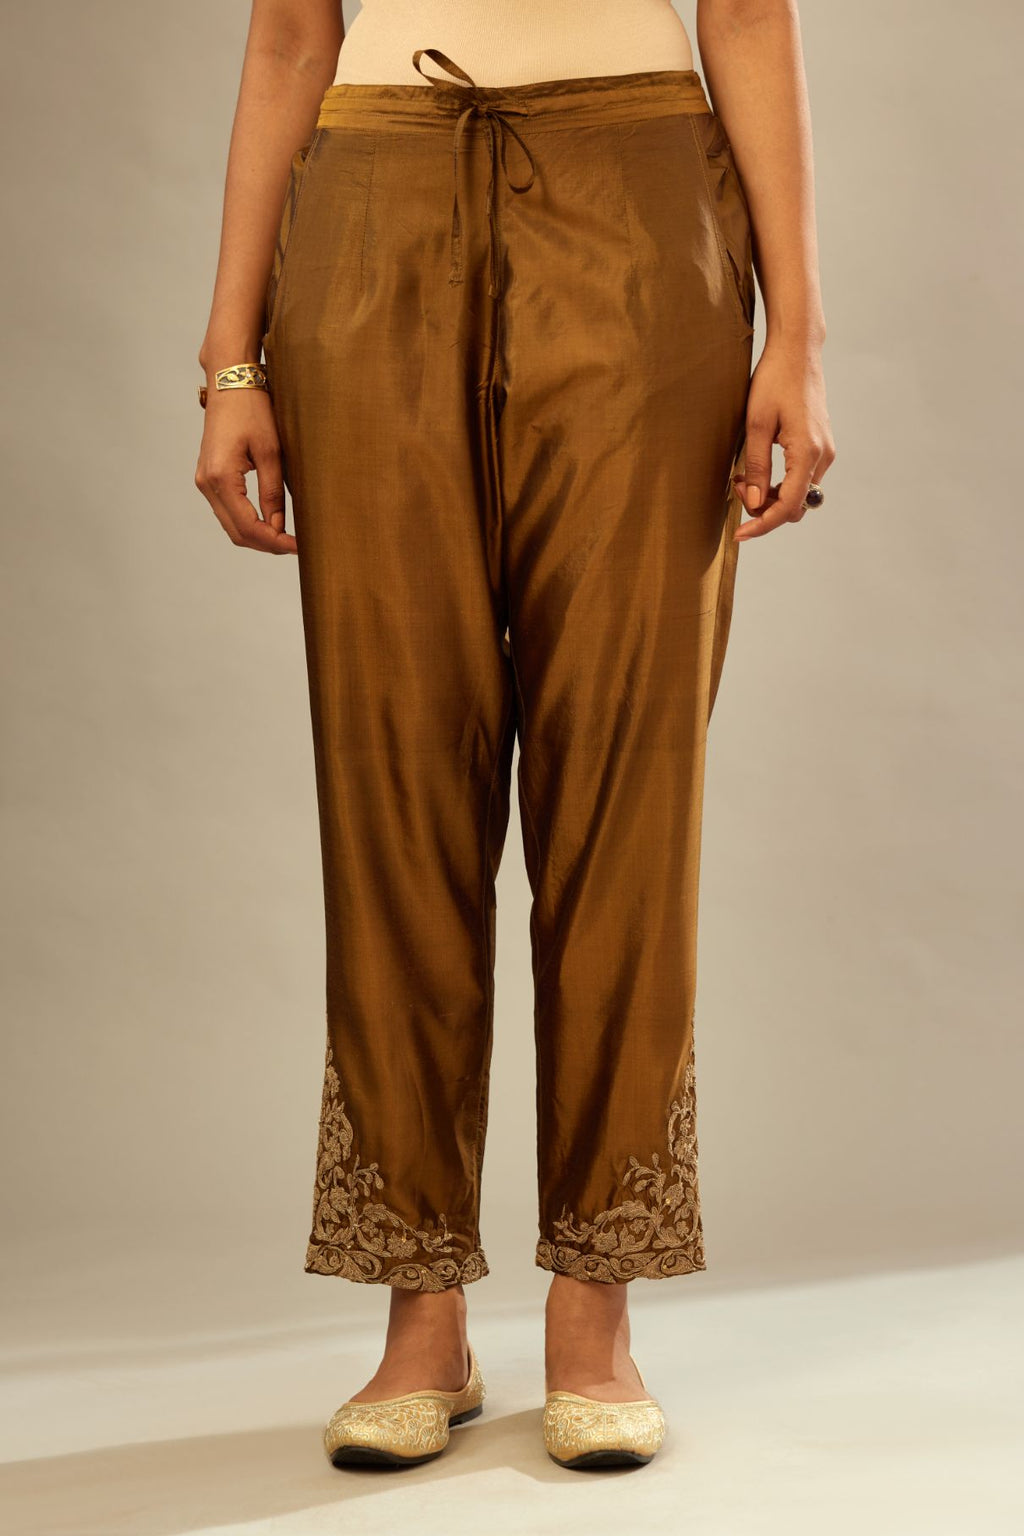 Golden olive silk pants with dori embroidered bootas at hem.